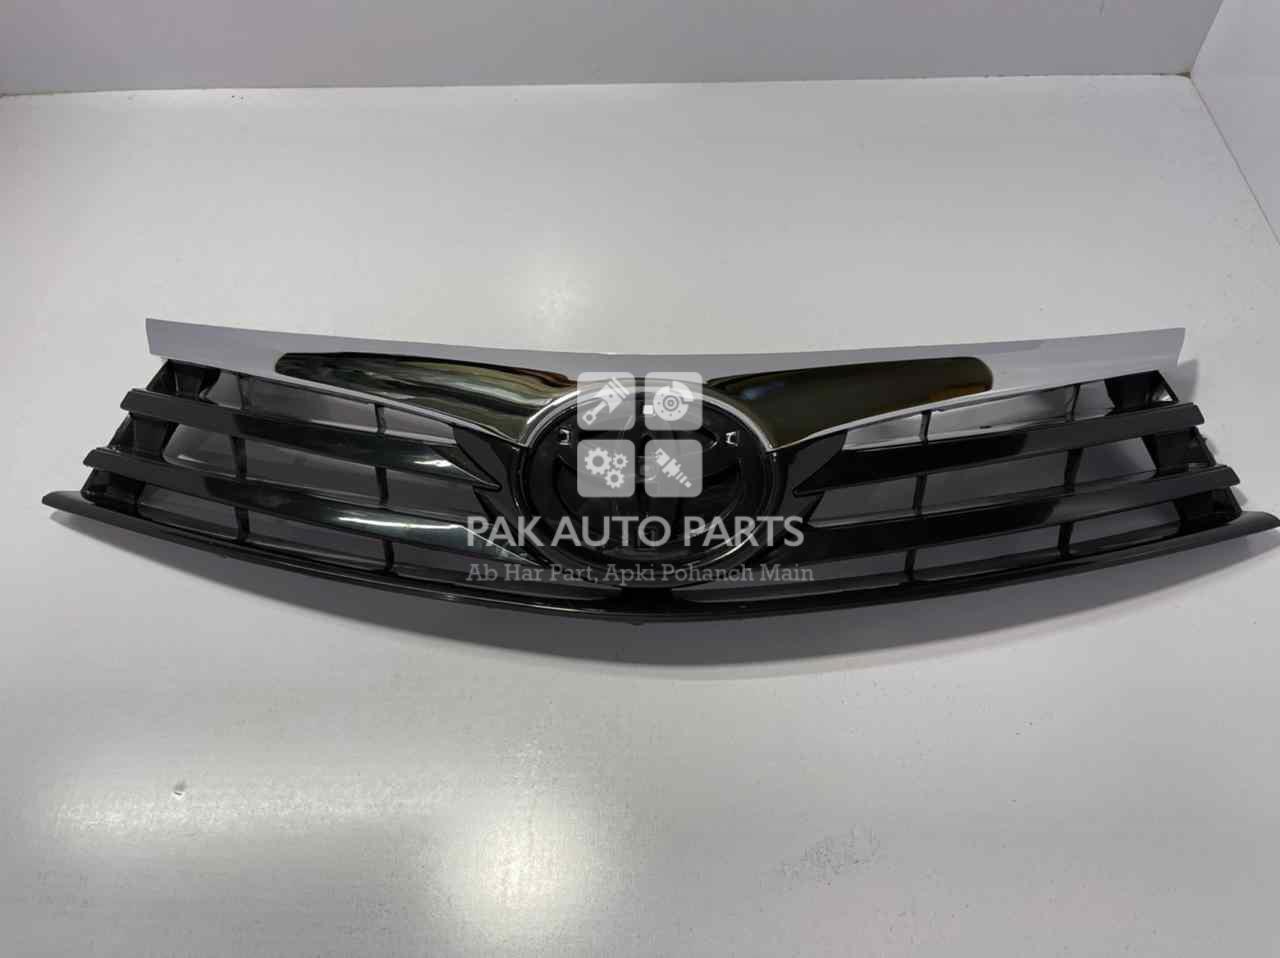 Picture of Toyota Corolla 2014-17 Front Show Grill Black